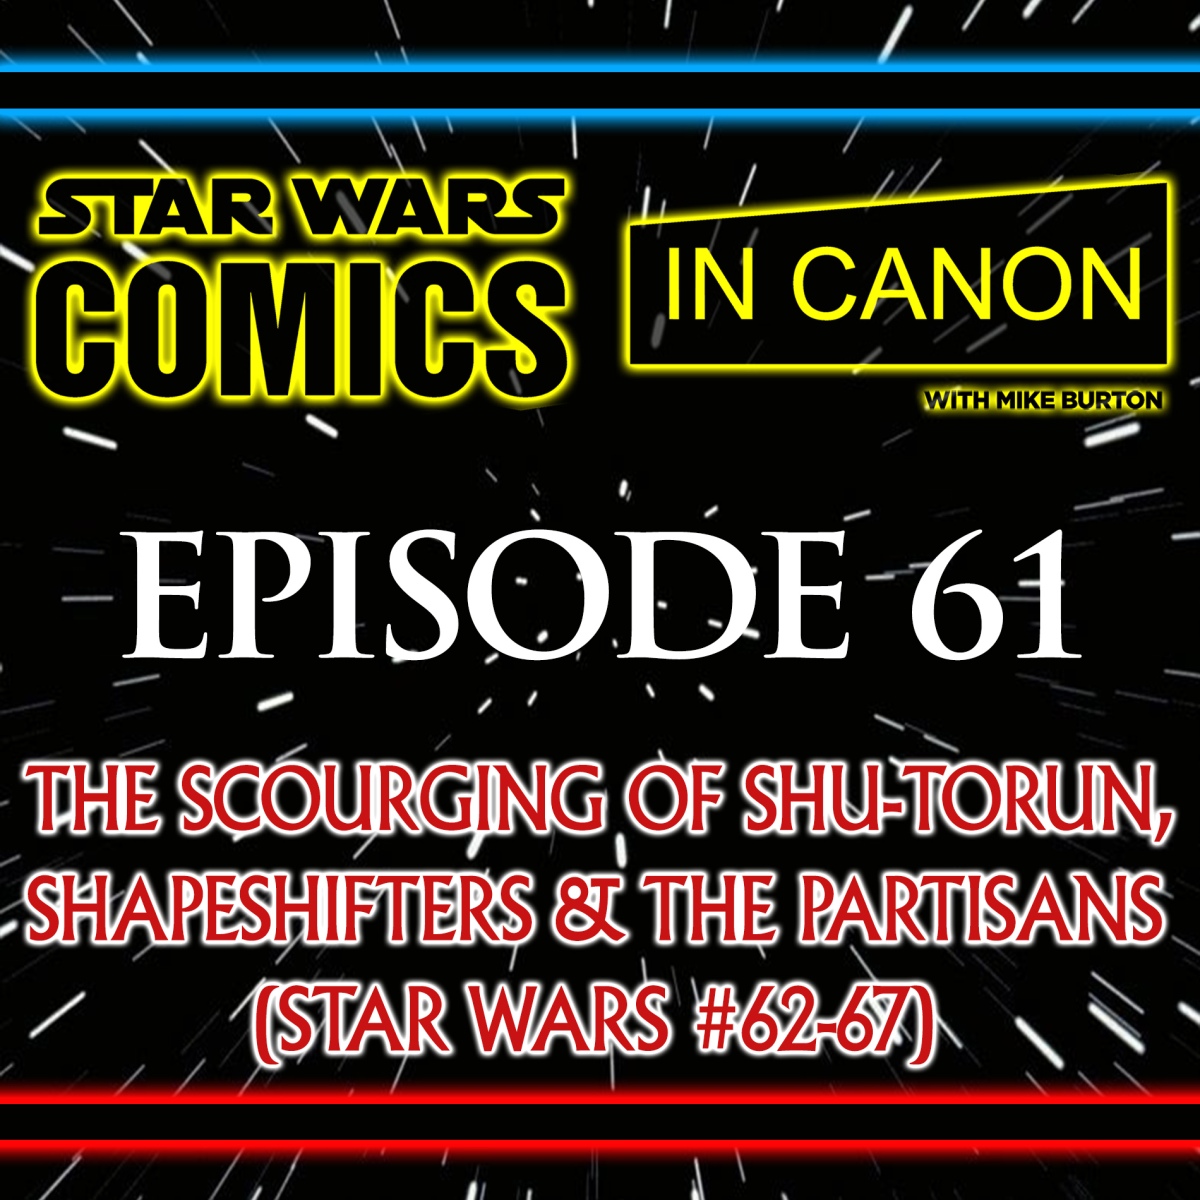 Star Wars: Comics In Canon – The Scourging Of Shu-Torun: Shapeshifters, Saw Gerrera’s Partisans, Queen Trios & More (Star Wars [2015] Vol 9: #62-67) – Ep 61